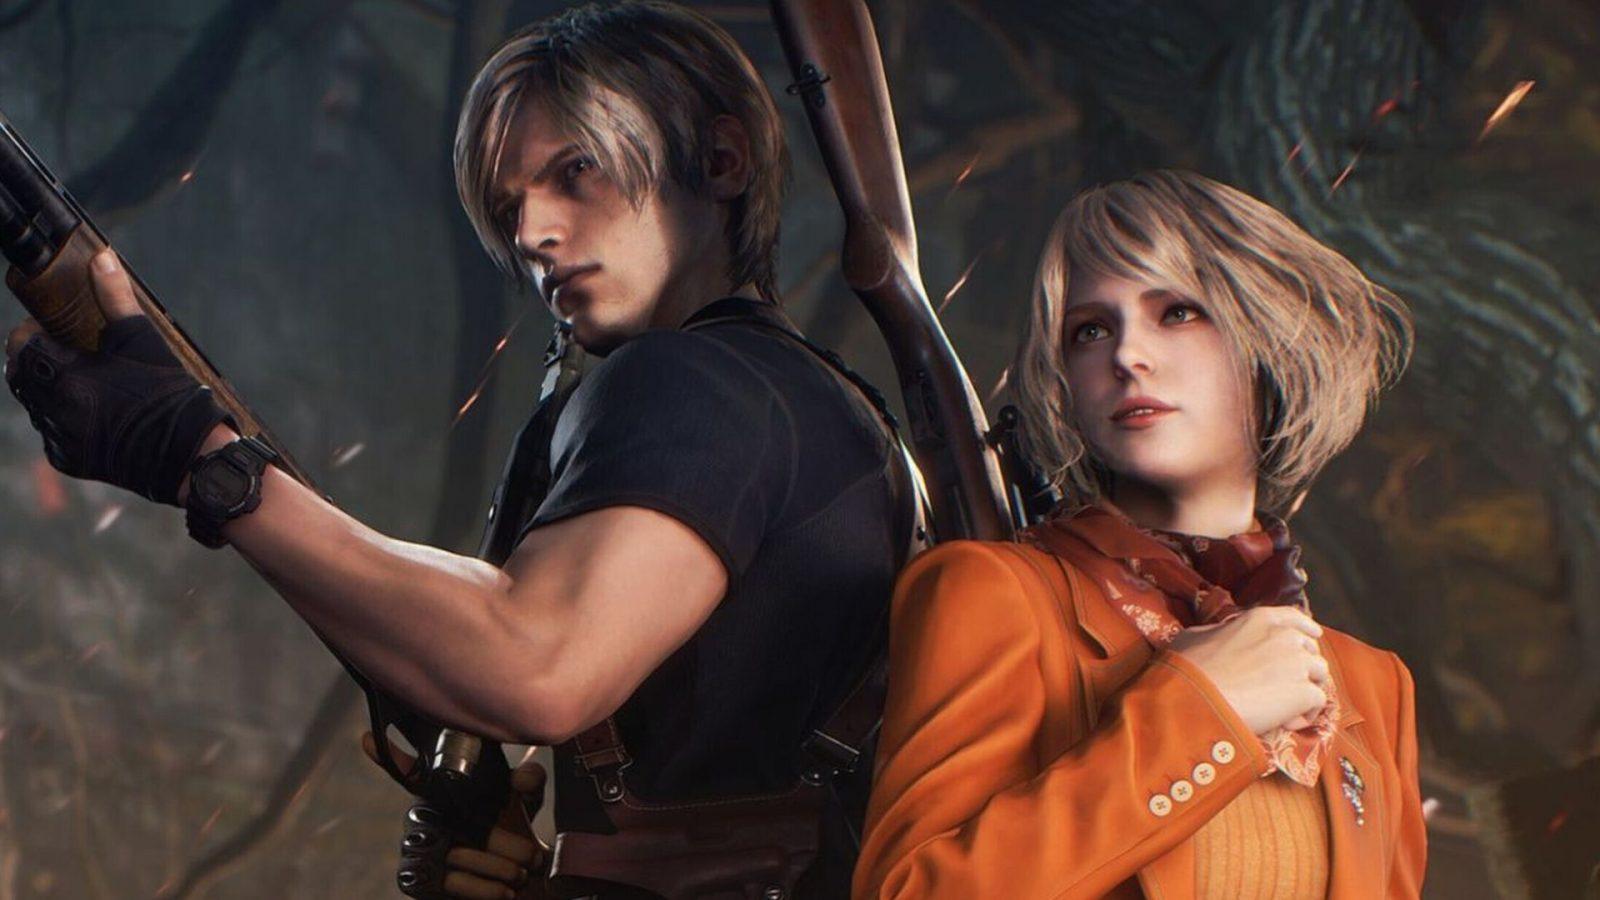 leon and ashley standing together in resident evil 4 remake